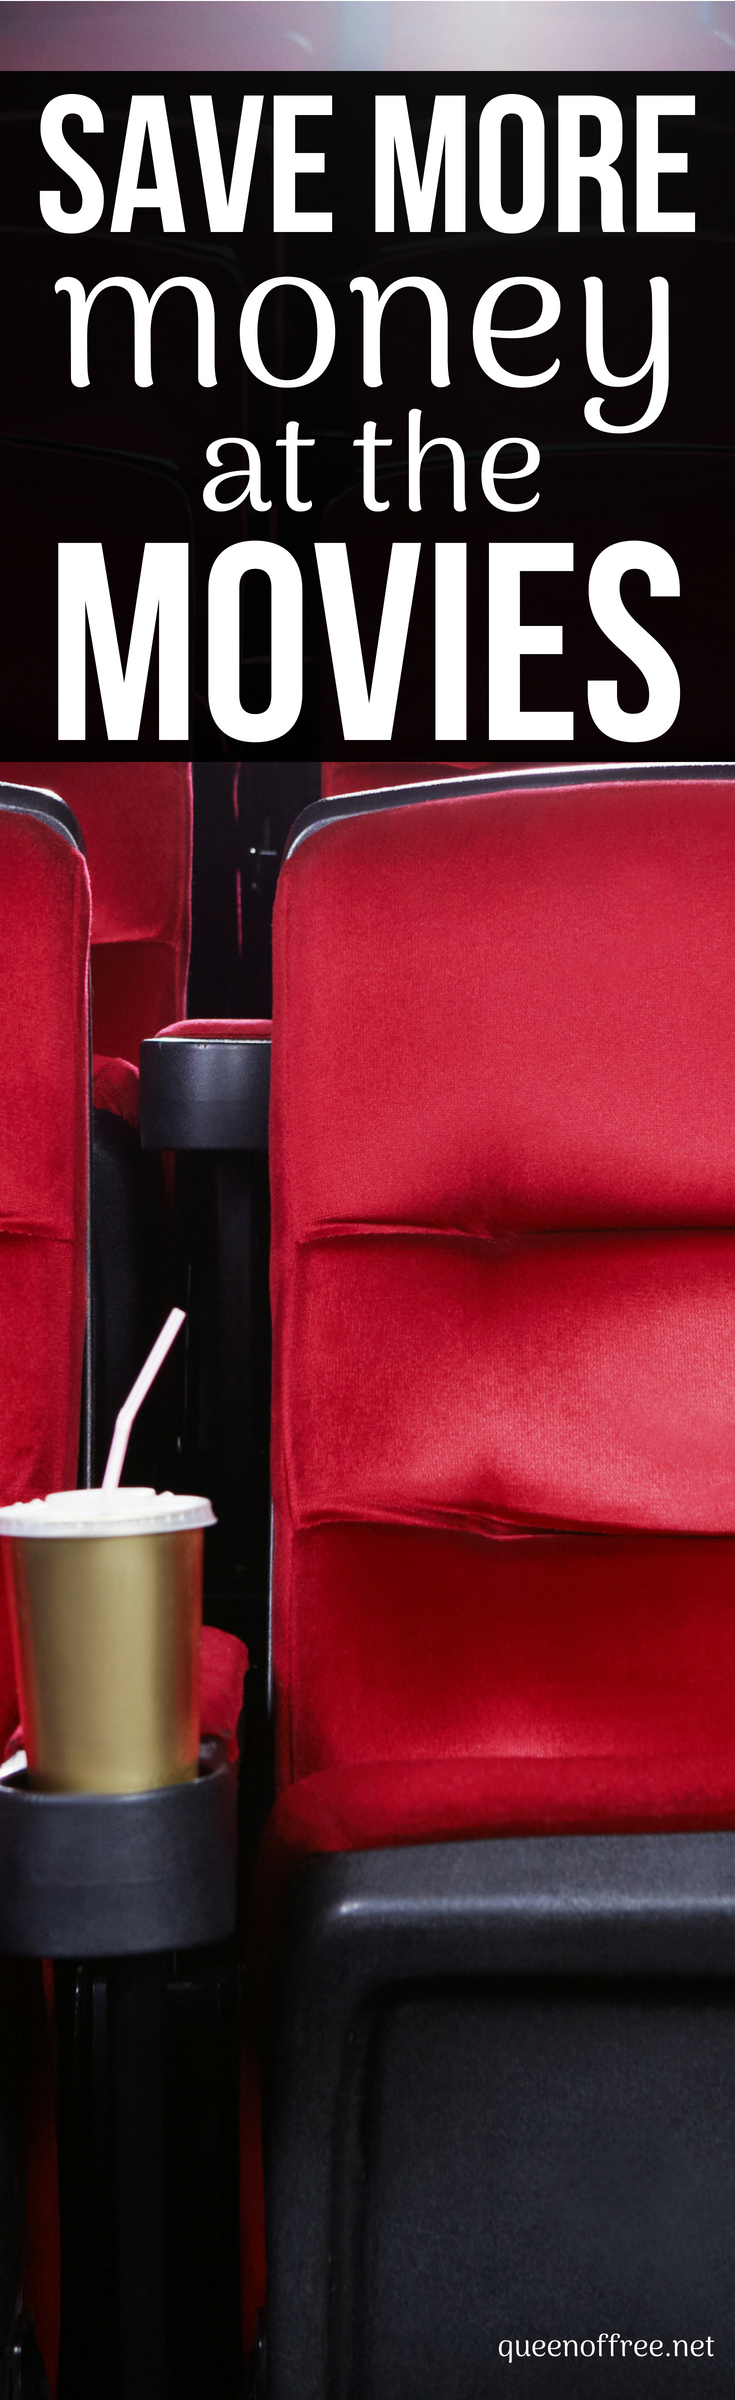 Enjoy the latest blockbuster without busting your budget. Check out these 7 smart strategies to save money on movies now!